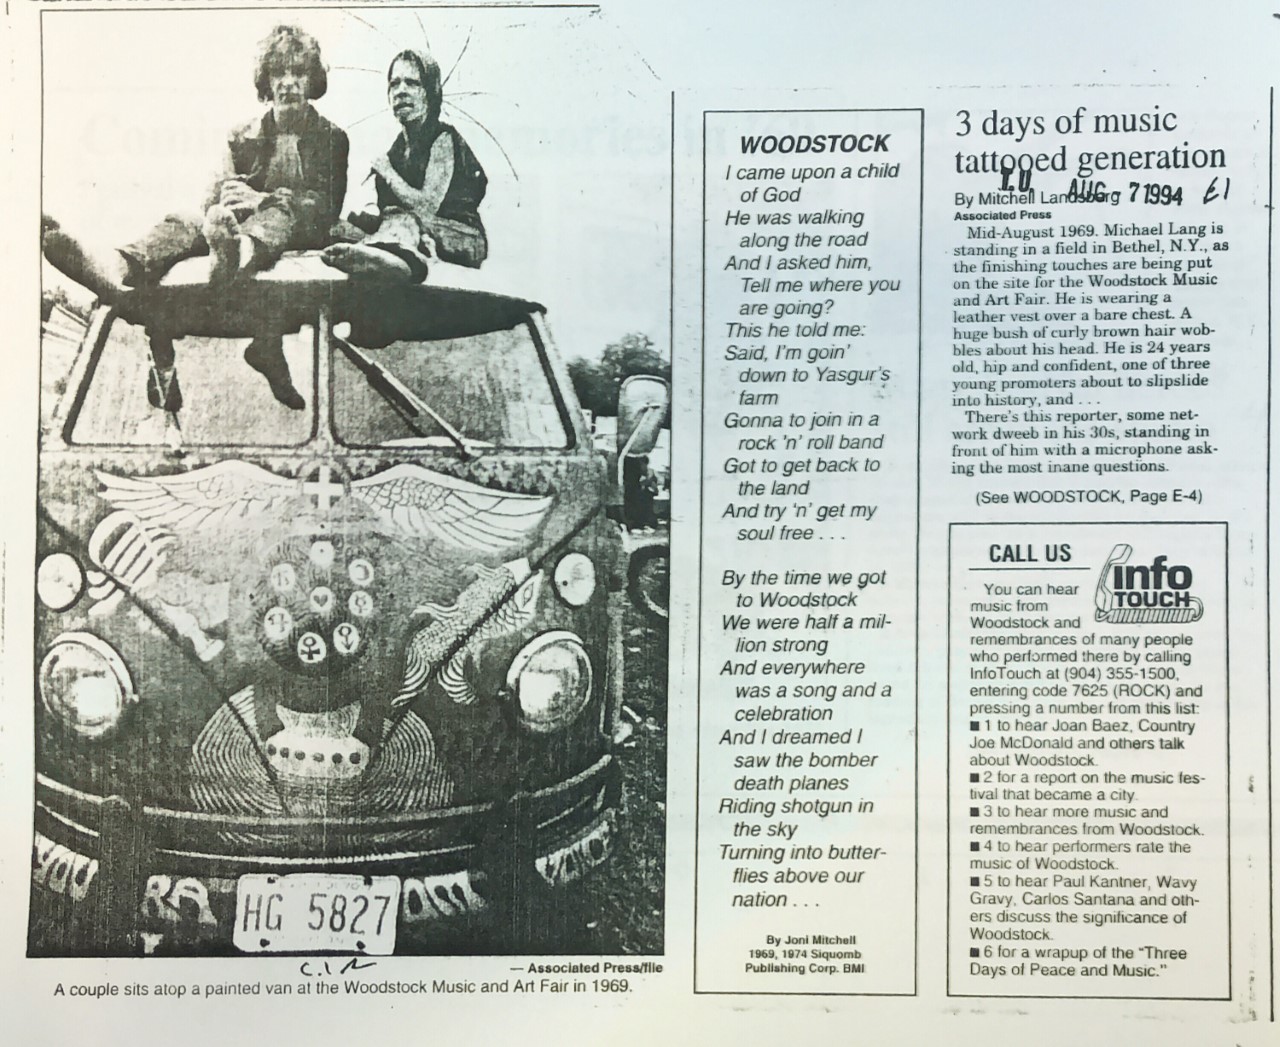 Woodstock newspaper article showing couple on top of a car